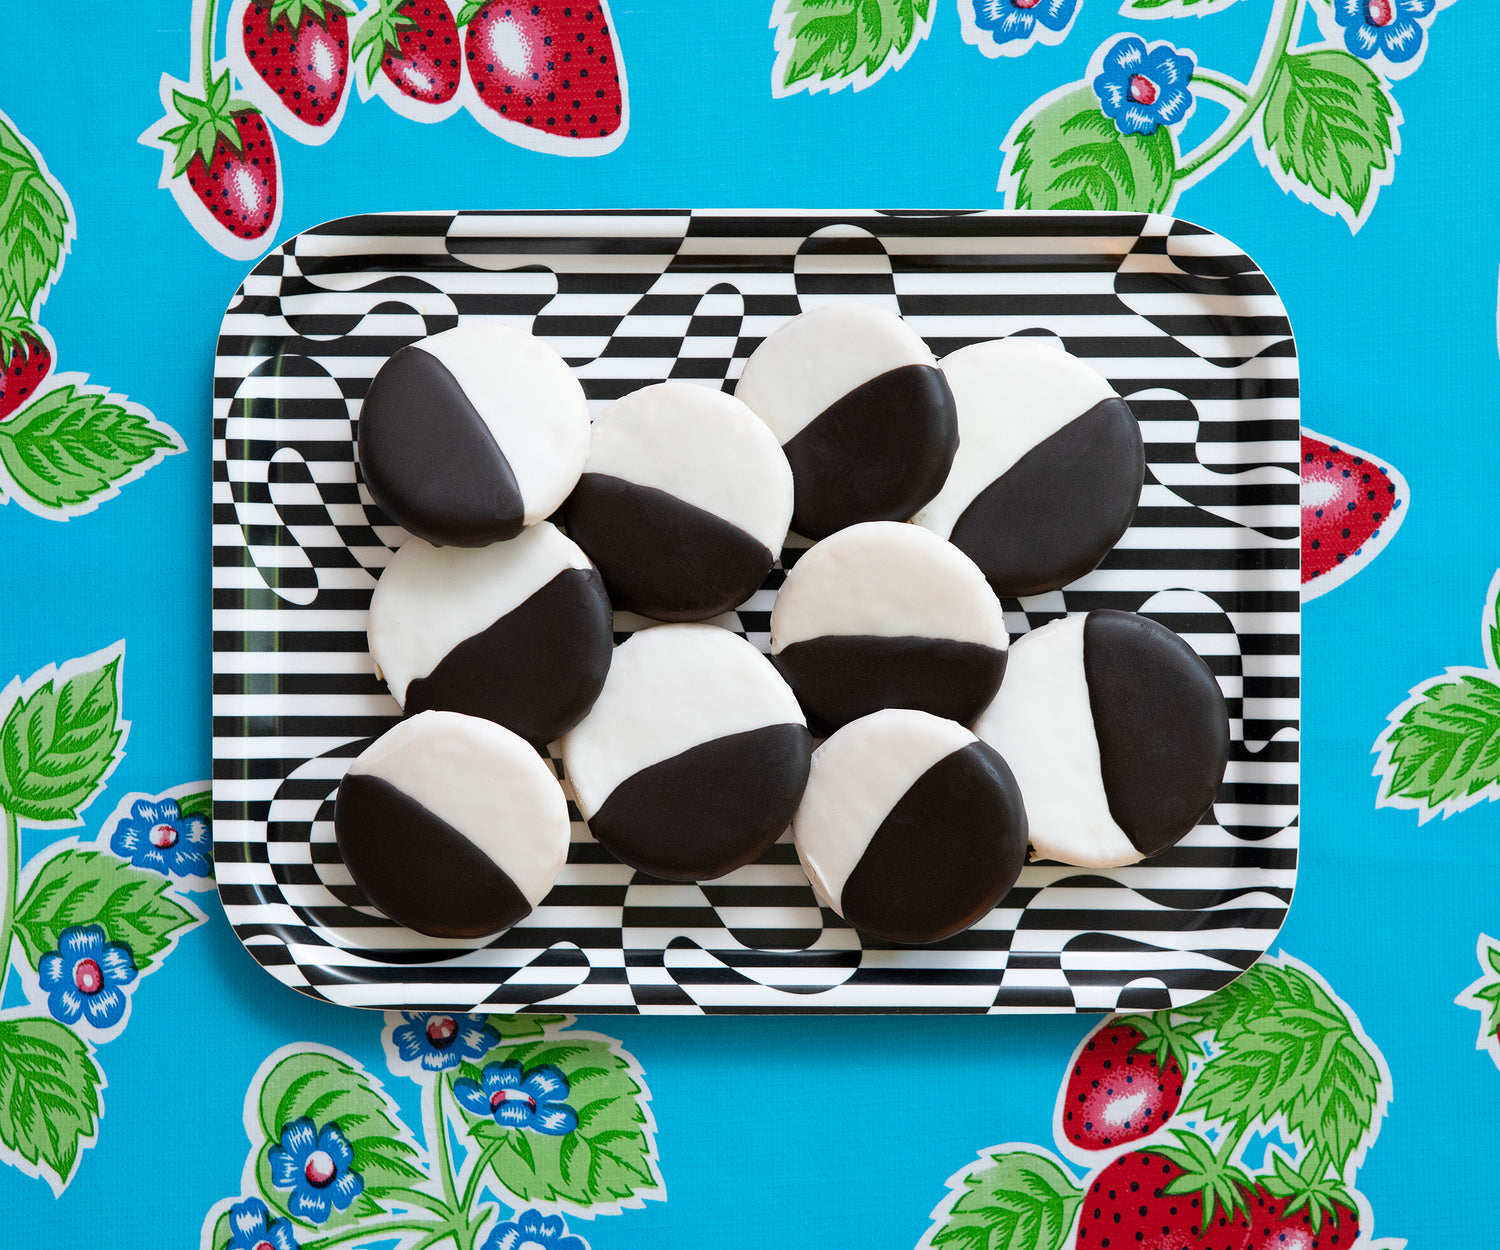 Detail of the Dazzle Tray with black and white cookies filling the tray against a strawberry patterned background. 